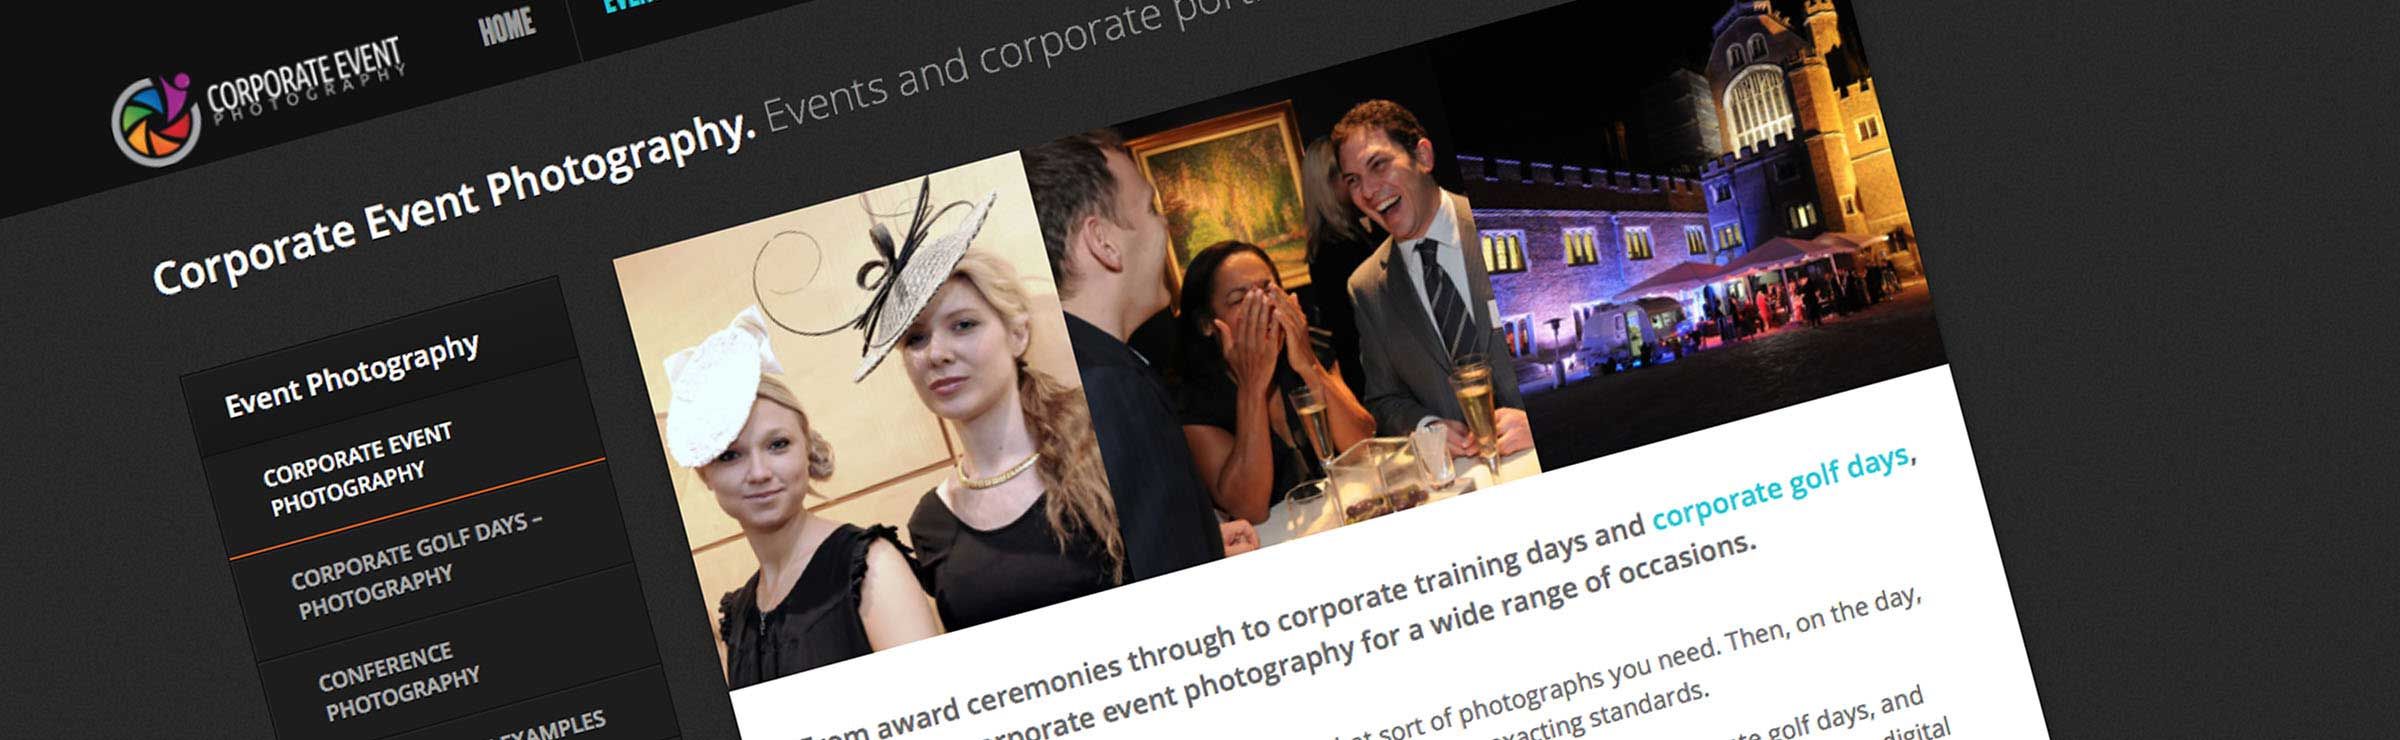 A sample of web content from Corporate Event Photography